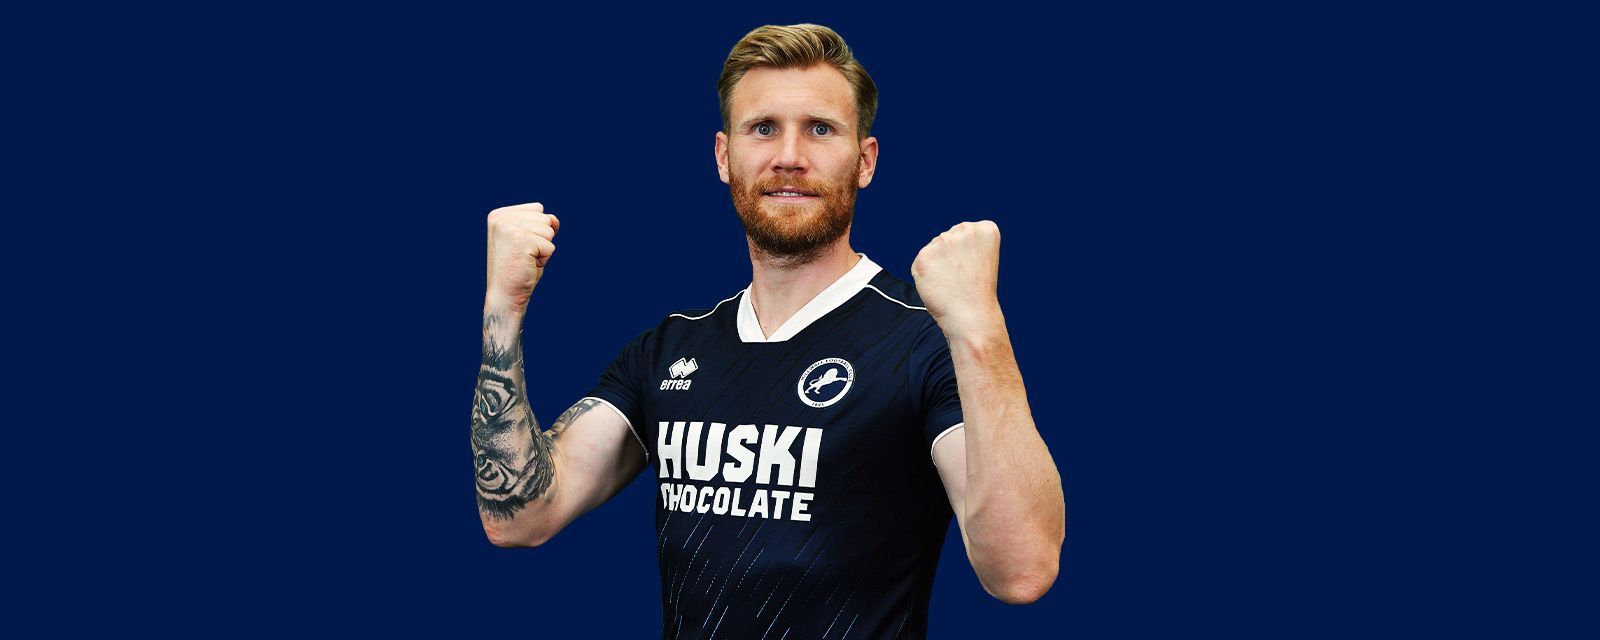 Millwall FC - Millwall announce Andreas Voglsammer signing